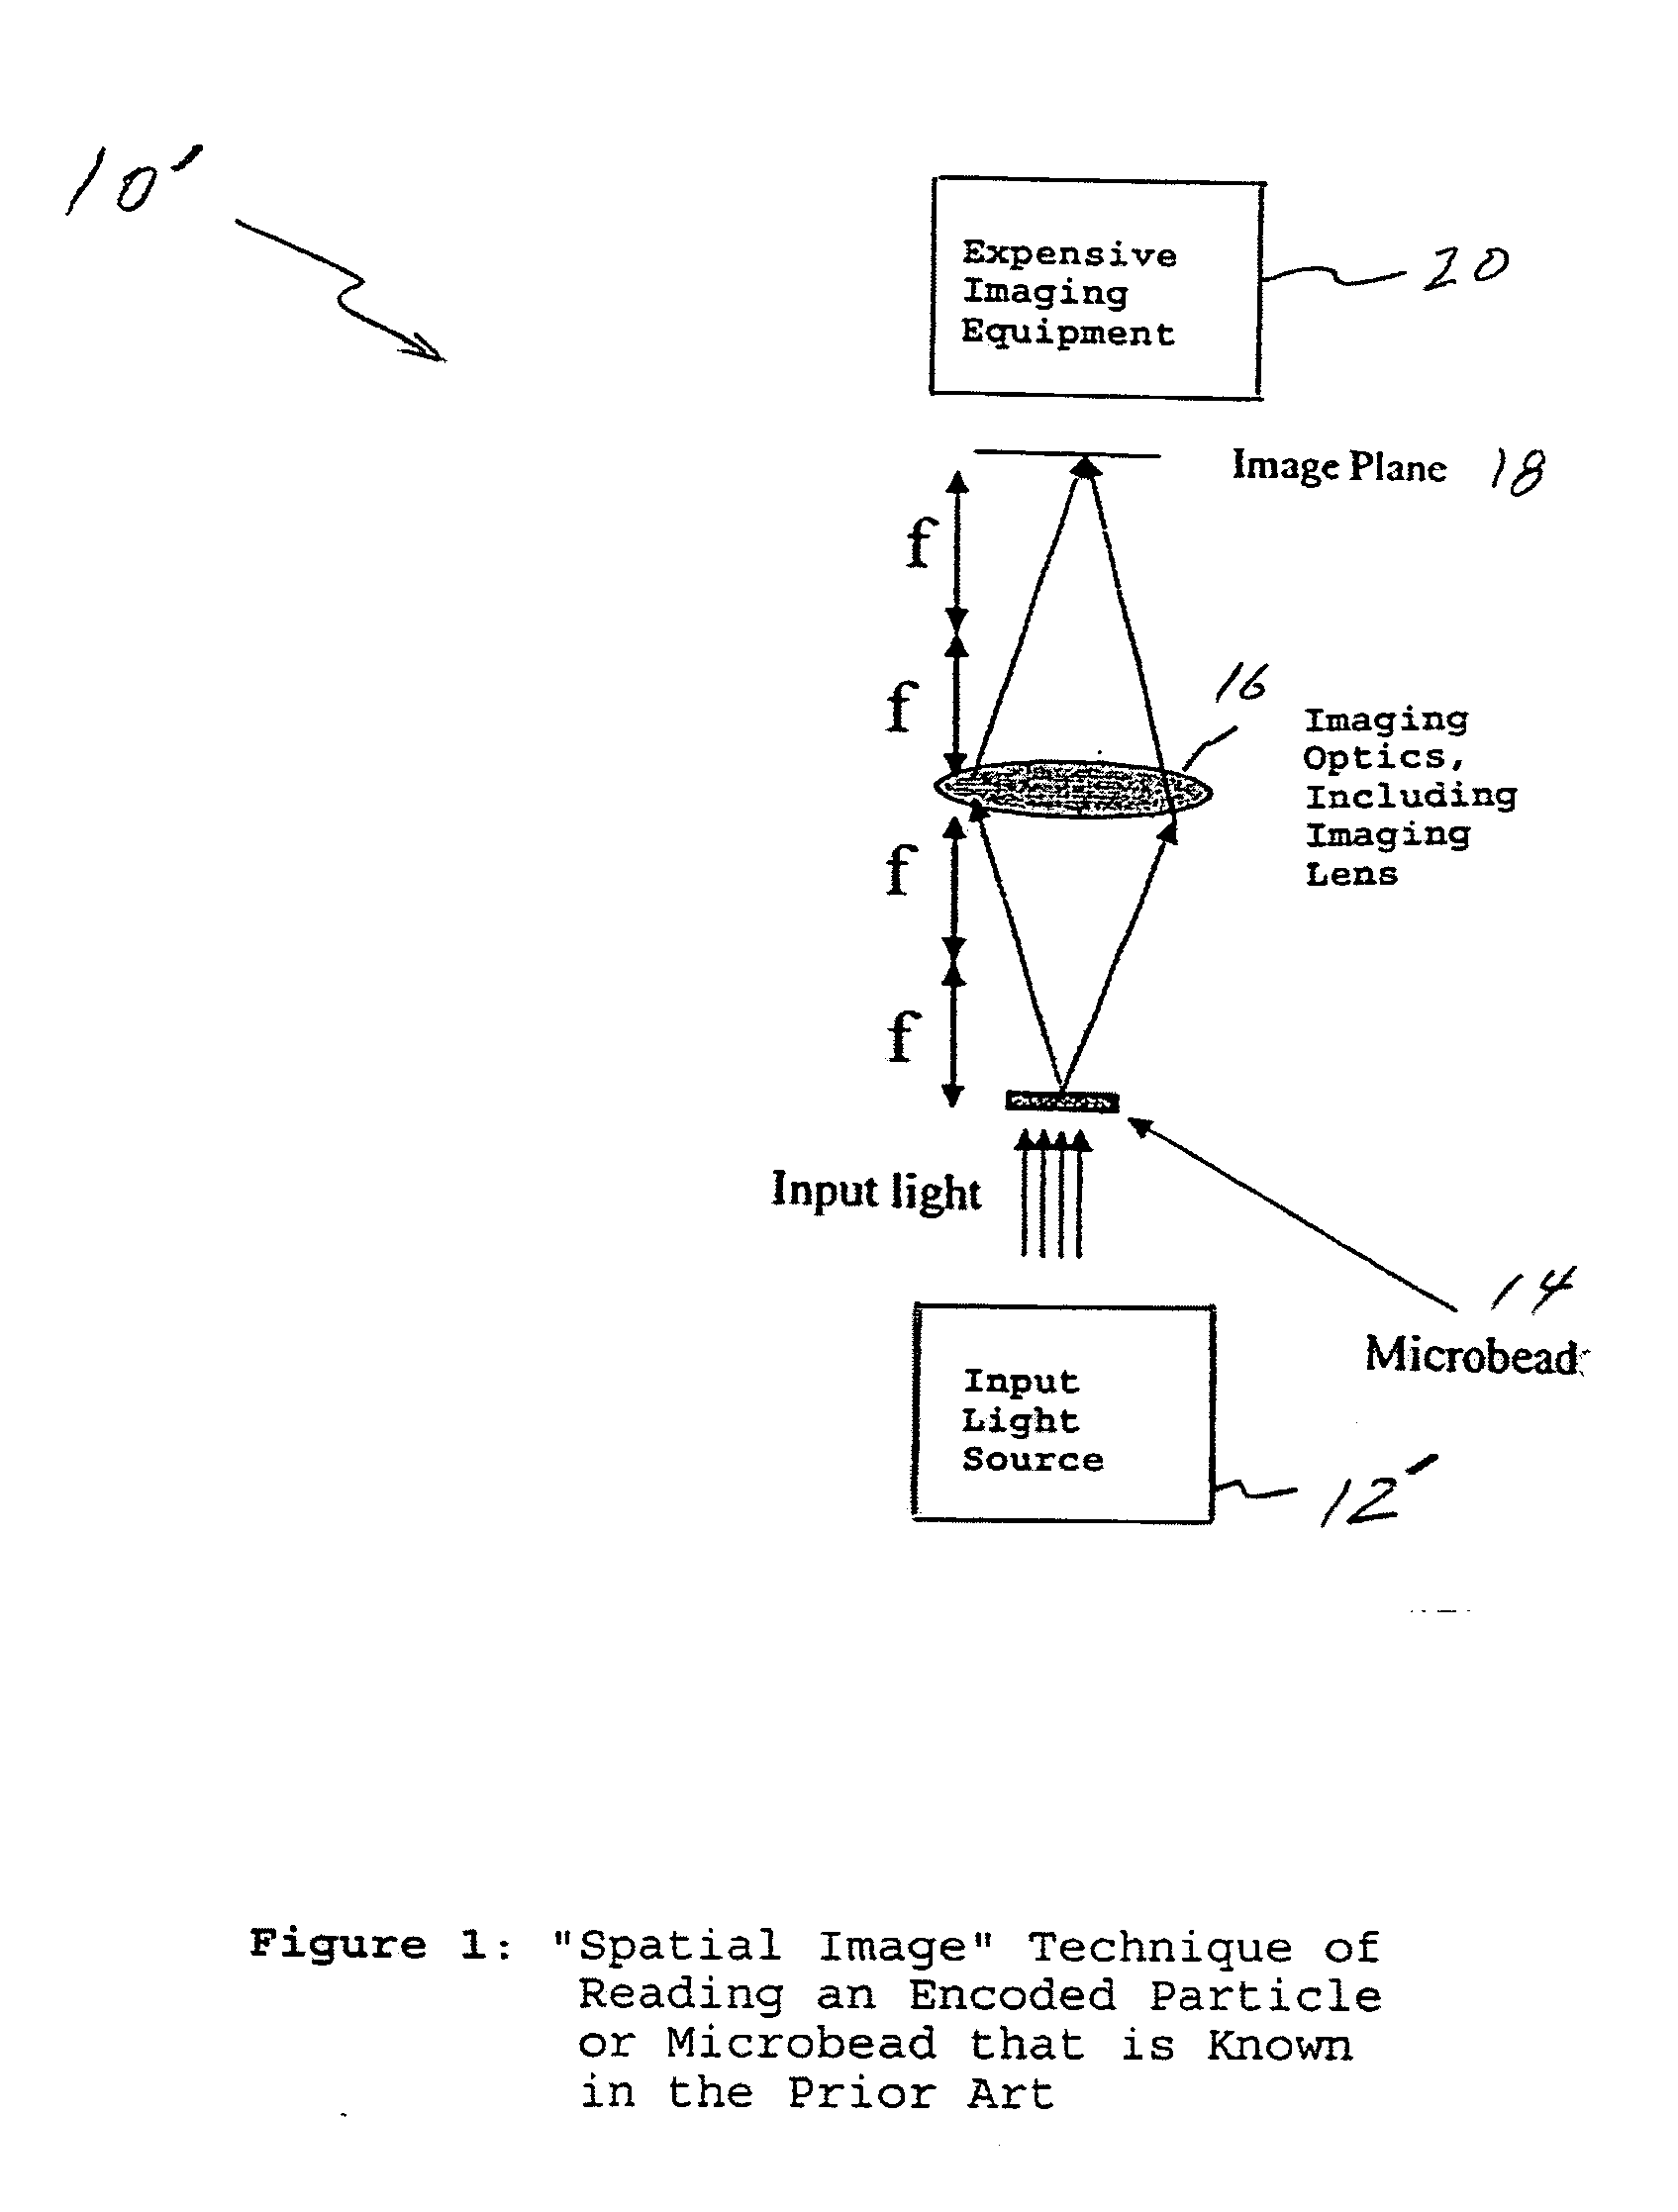 Fourier scattering methods for encoding microbeads and methods and apparatus for reading the same